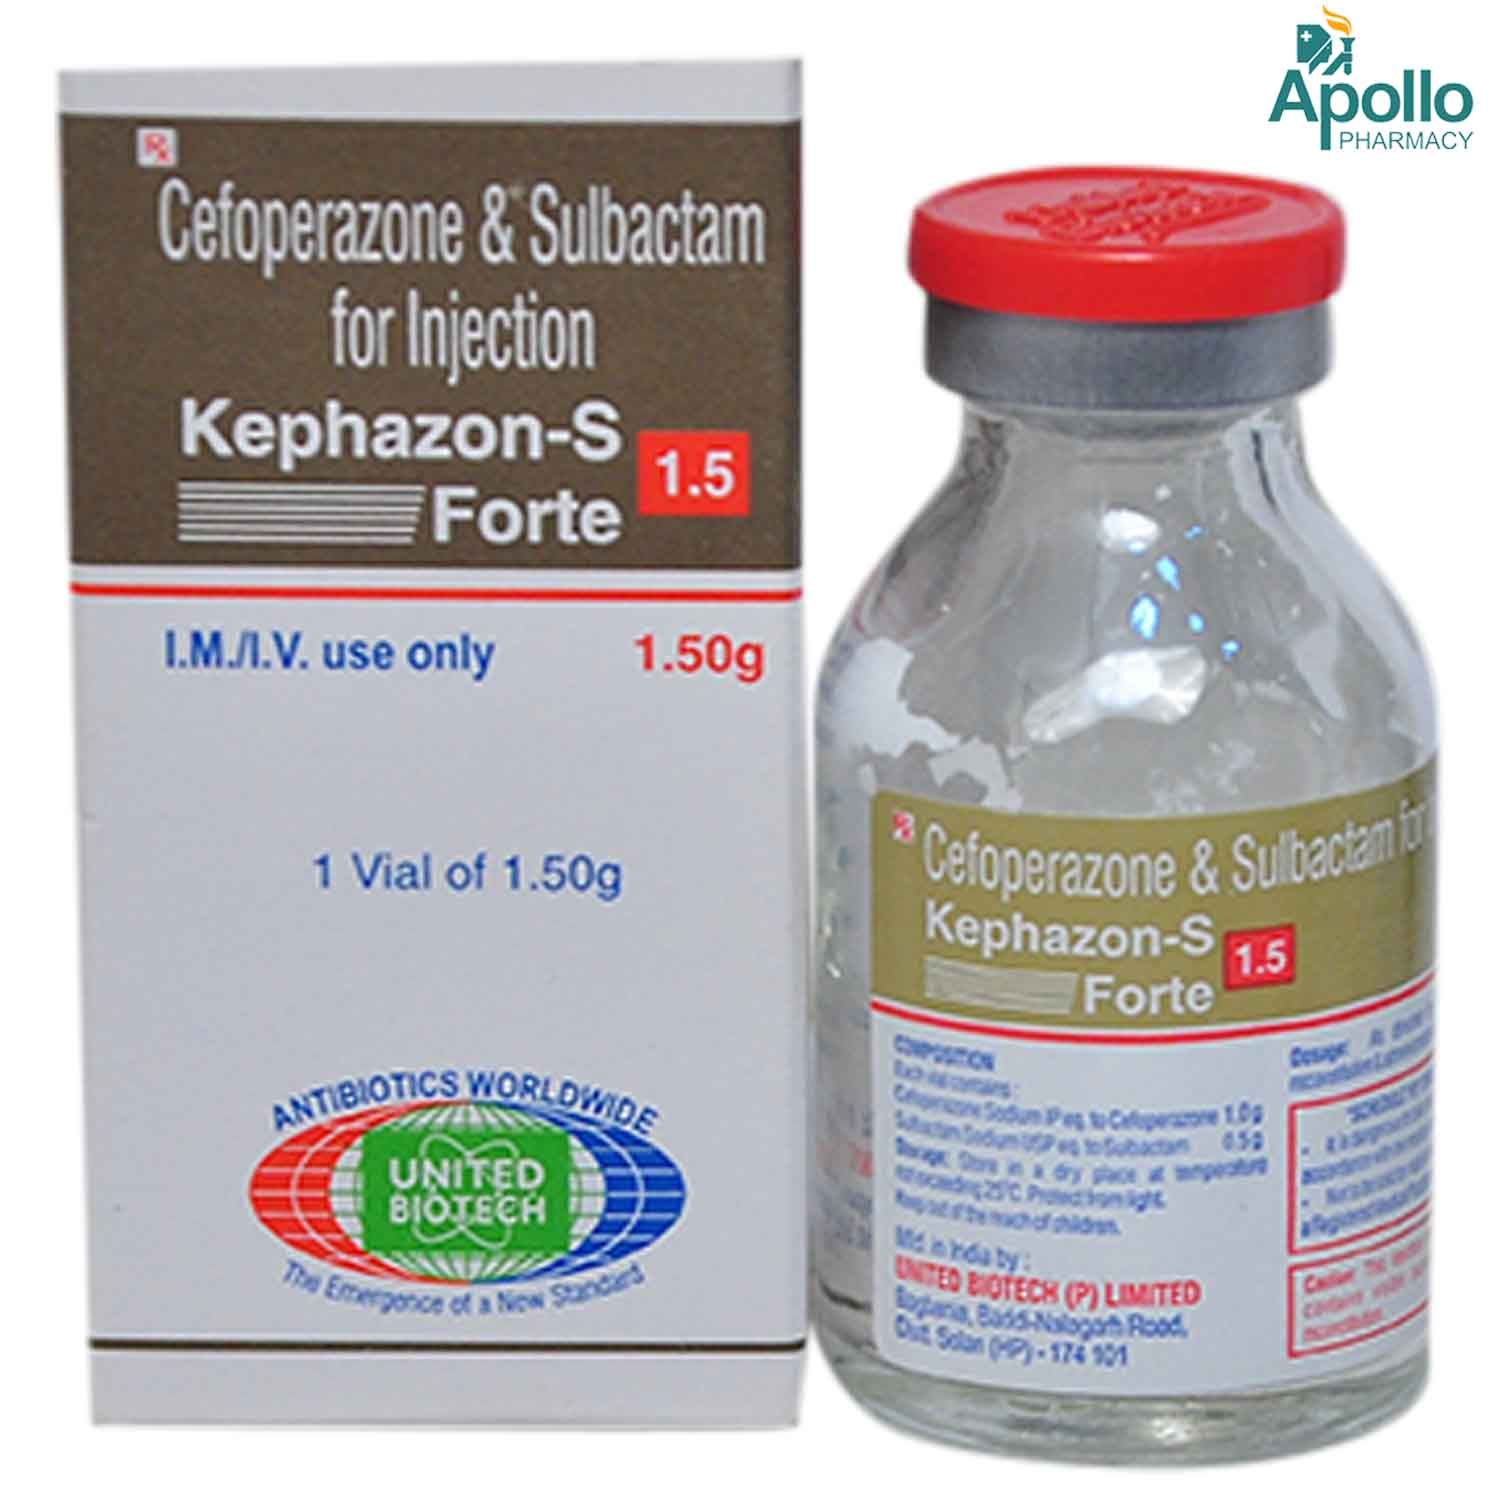 Kephazons Forte Injection 1 50gm Price Uses Side Effects Composition Apollo Pharmacy